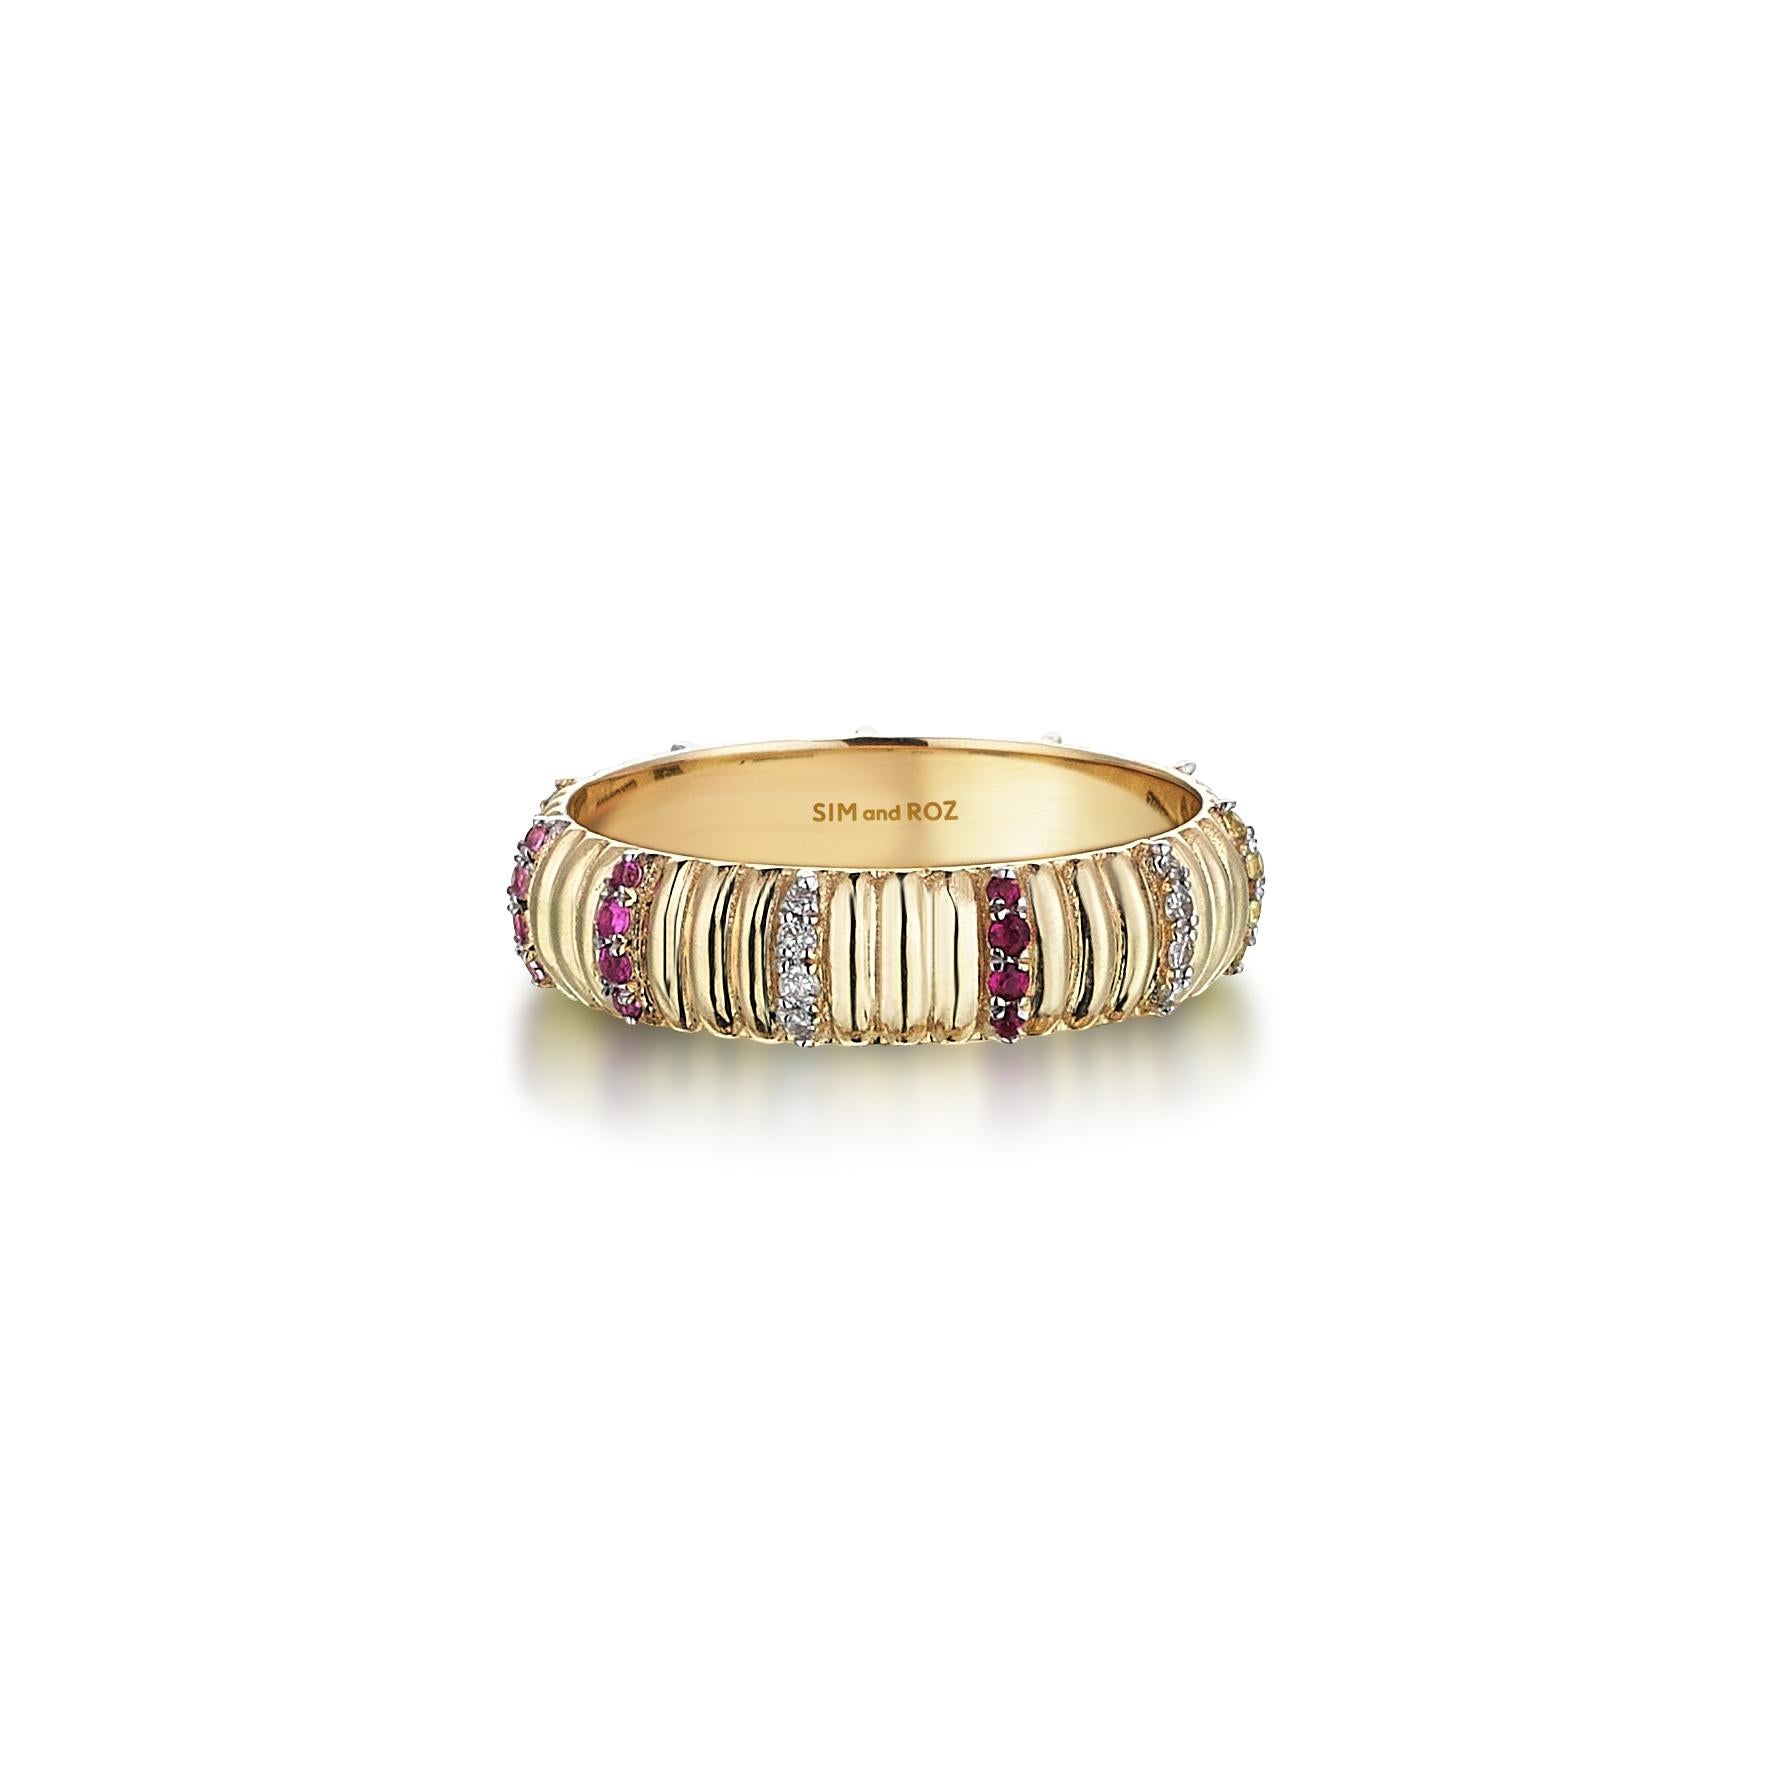 For Sale:  Sim and Roz 18K Yellow Gold Band Ring with Diamonds and Multicolor Sapphires 4